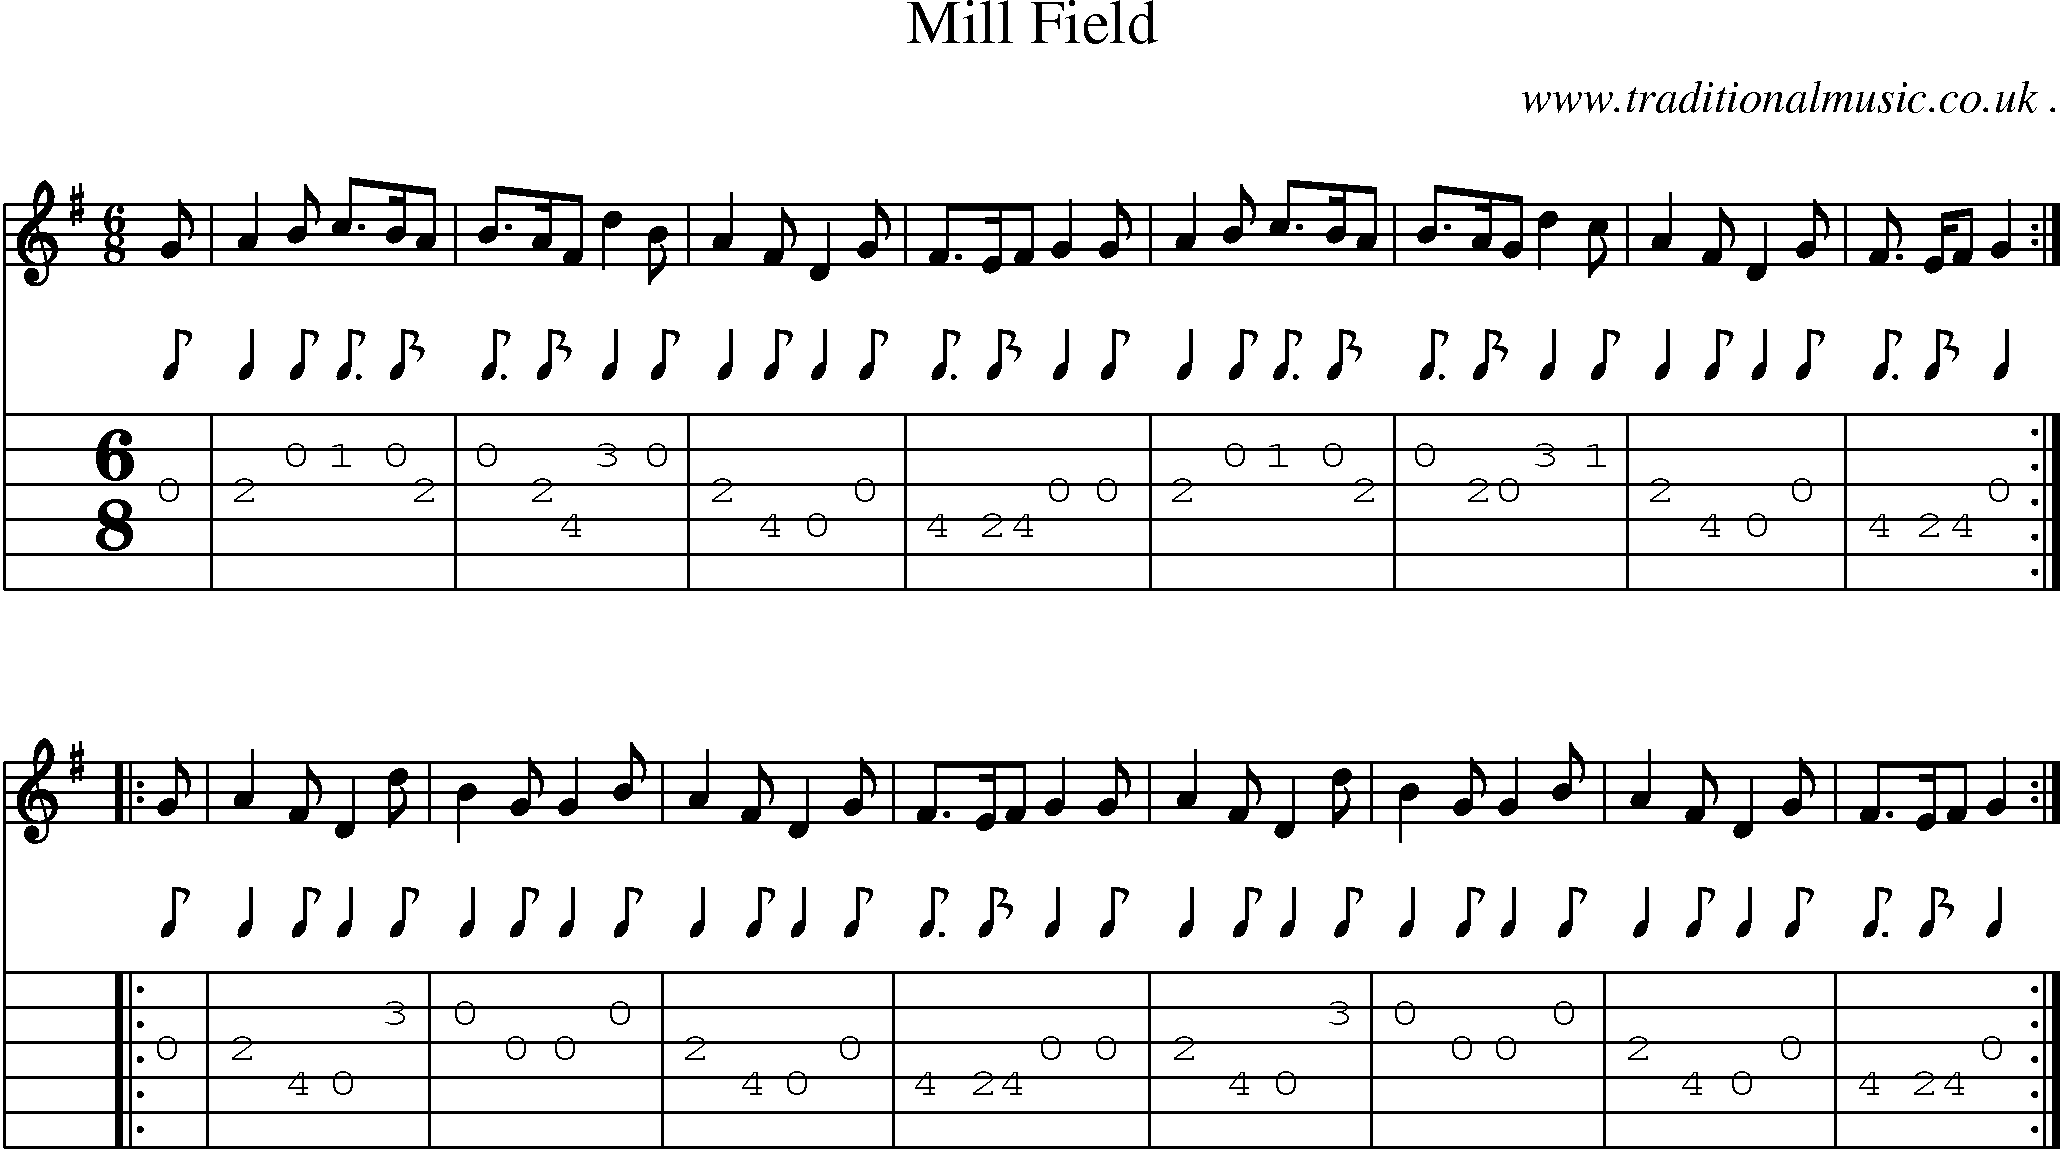 Sheet-Music and Guitar Tabs for Mill Field